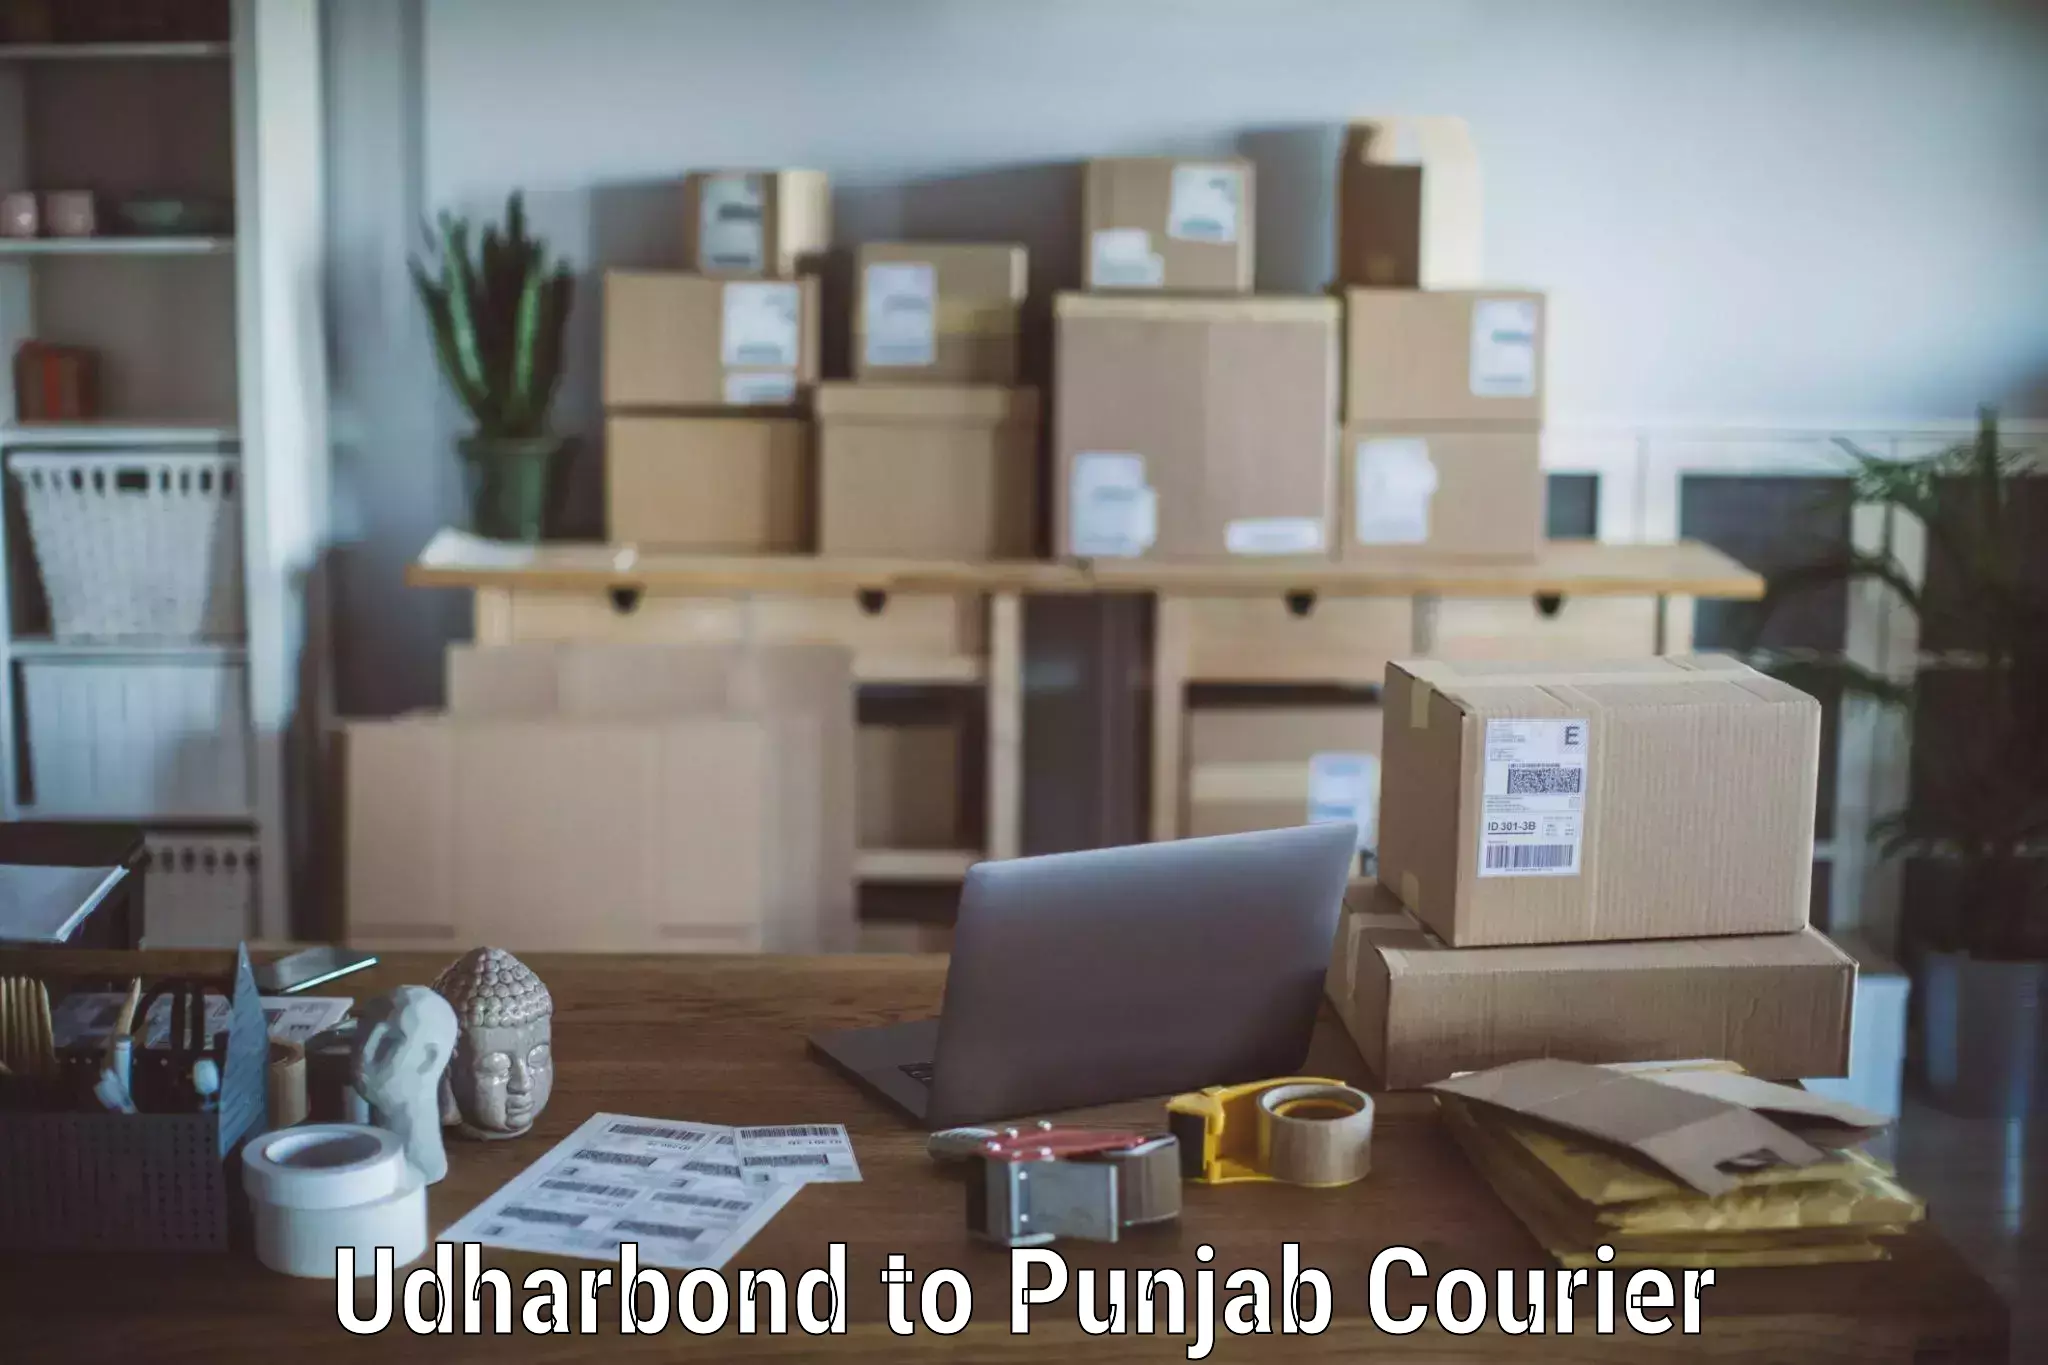 Hassle-free relocation Udharbond to Zirakpur